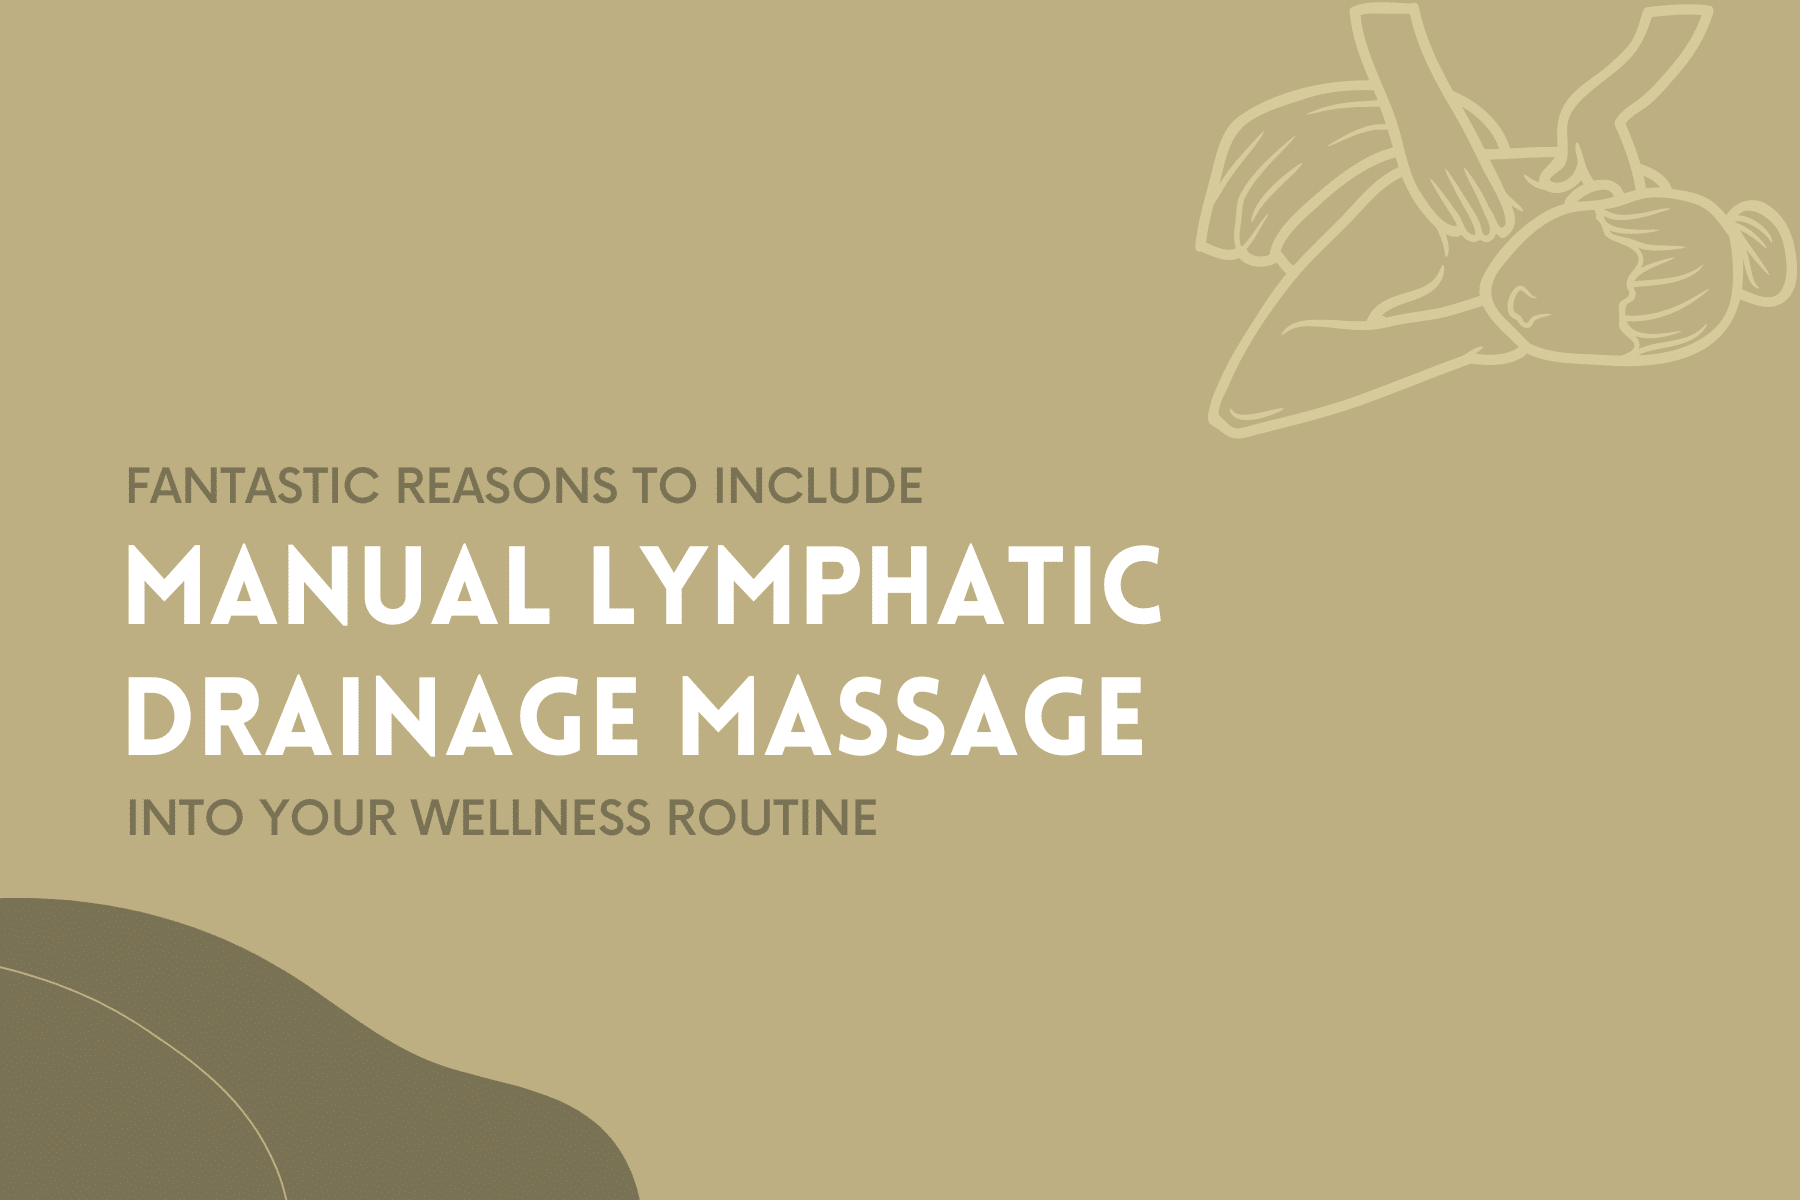 Why Should I Add Manual Lymphatic Drainage To My Wellness Routine